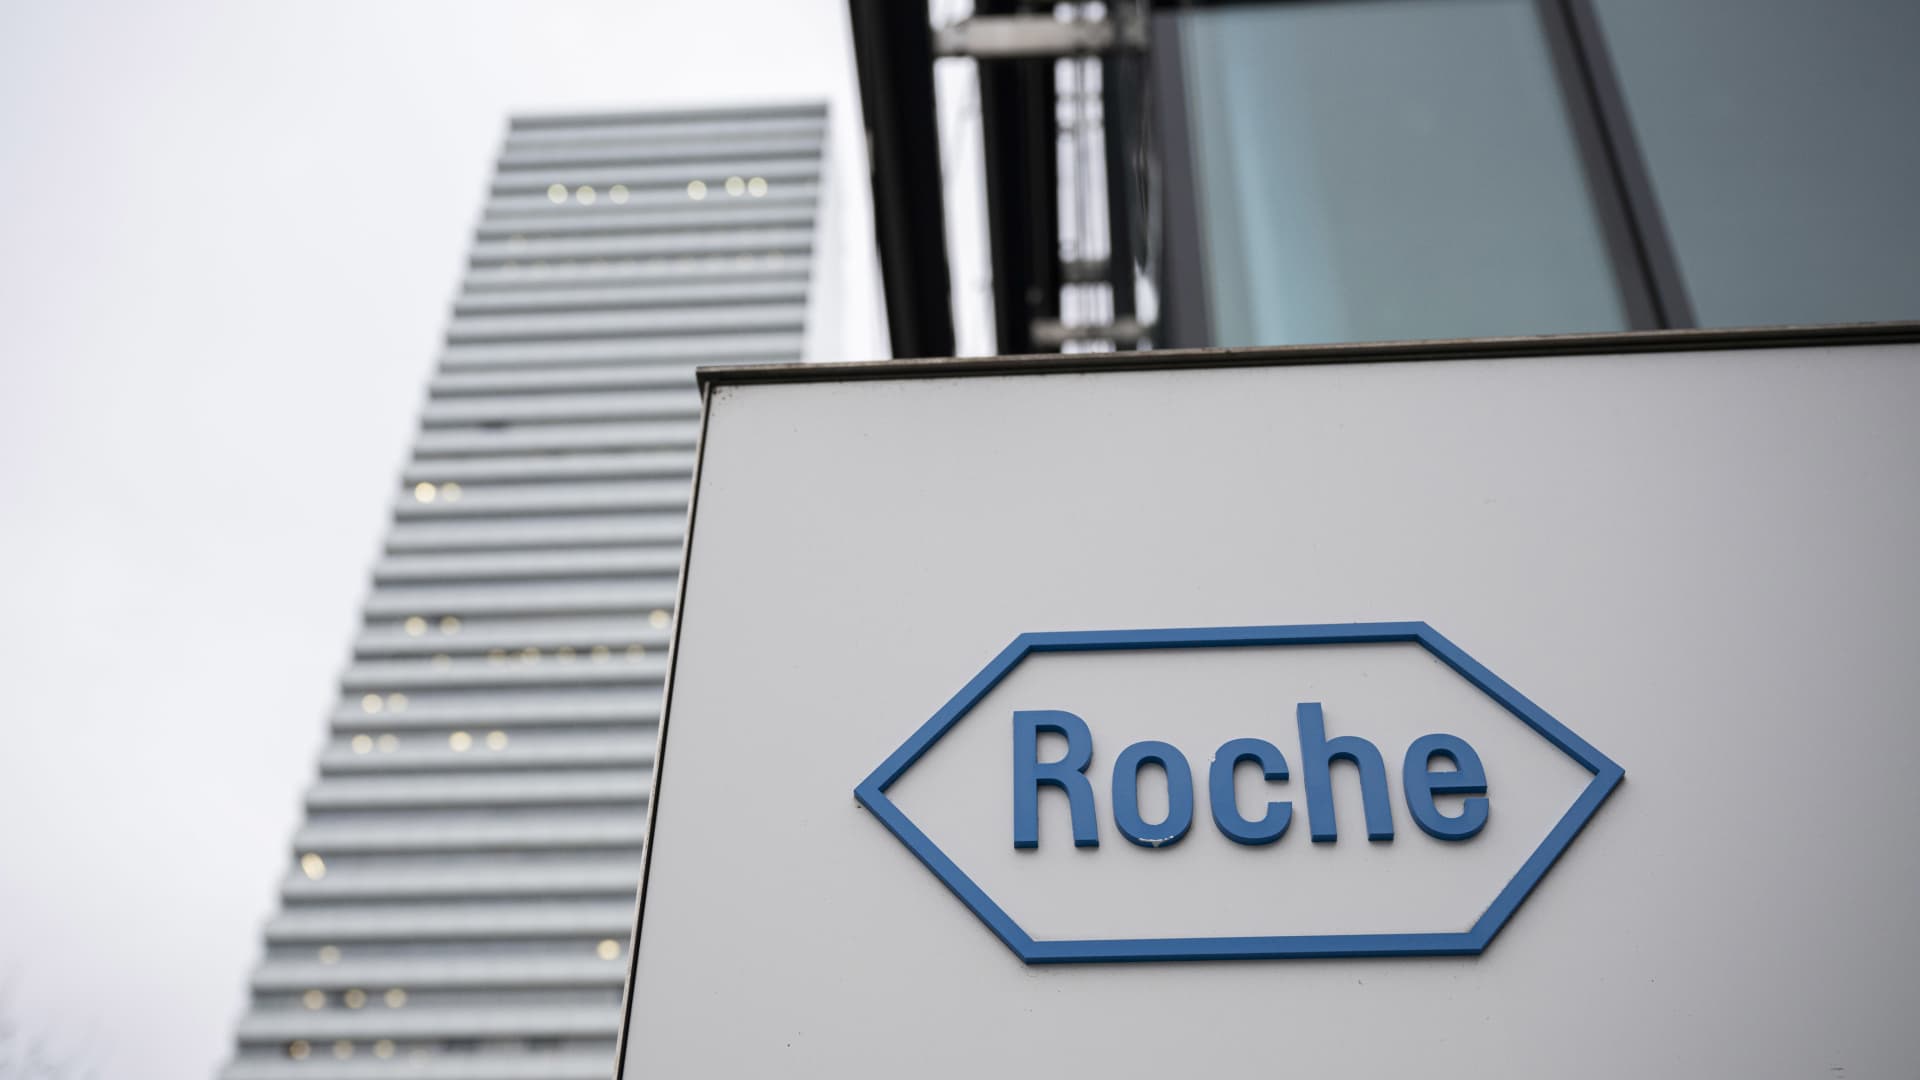 Roche weight loss drug shows promising results in early trial [Video]